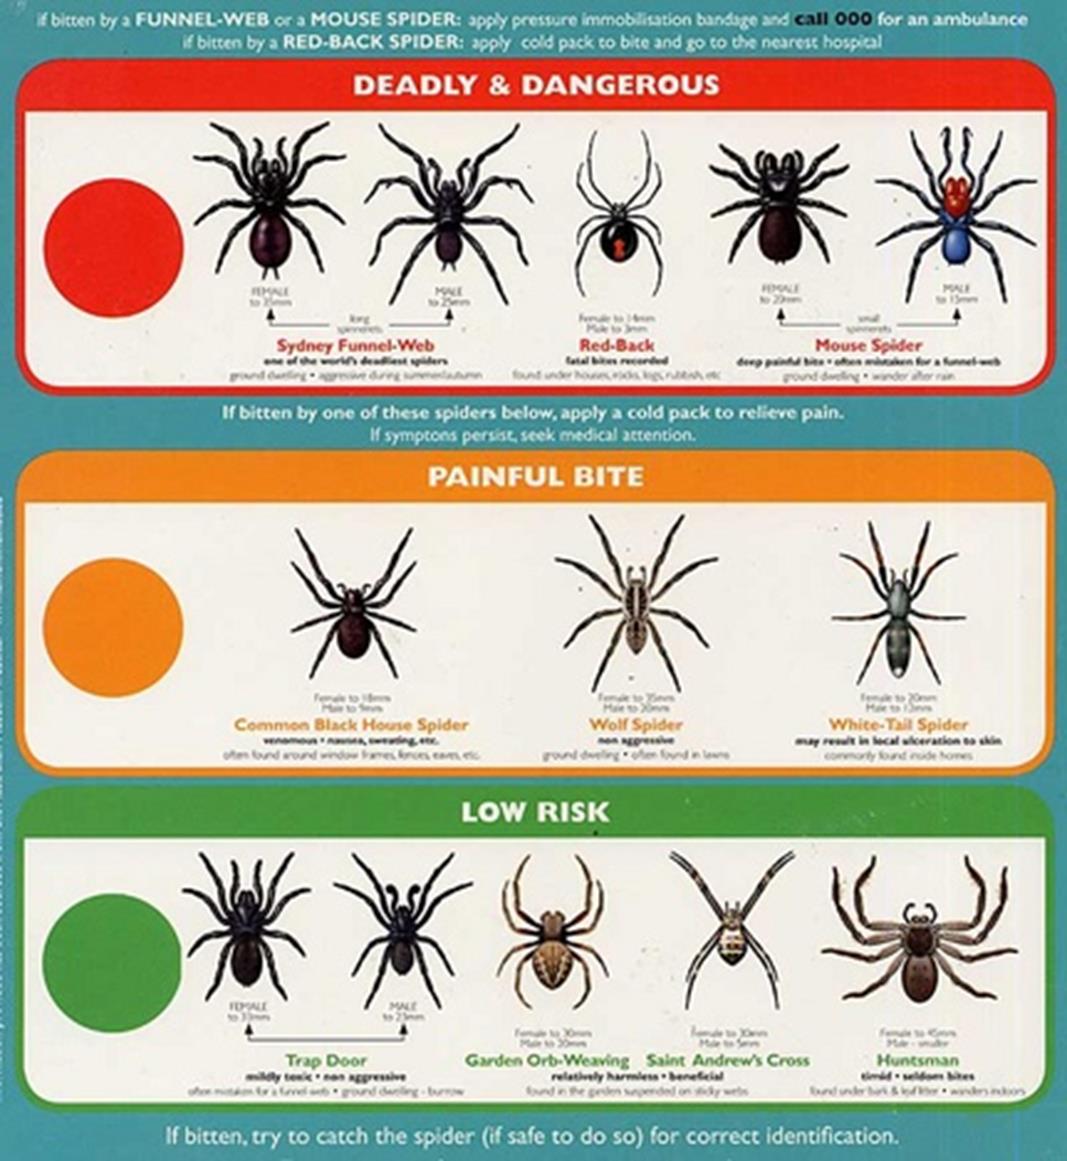 All About Spiders - Types of Spiders, Life Cycle, etc.